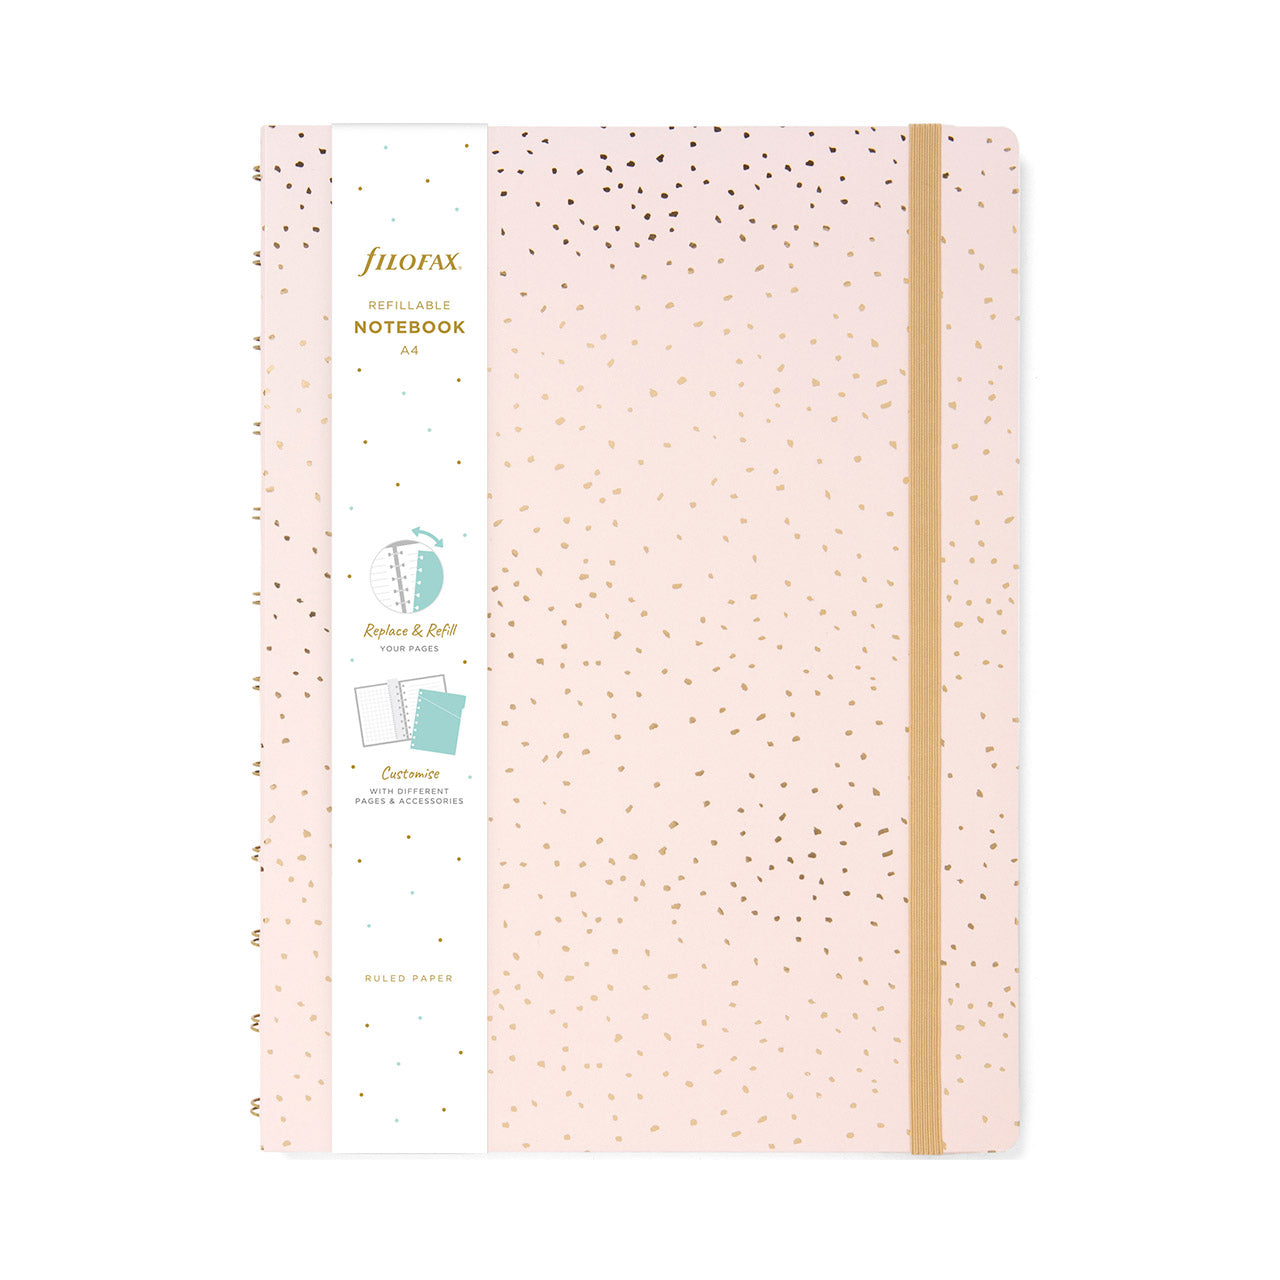 Filofax 2024 Personal Diary Refill Week On Two Pages Confetti